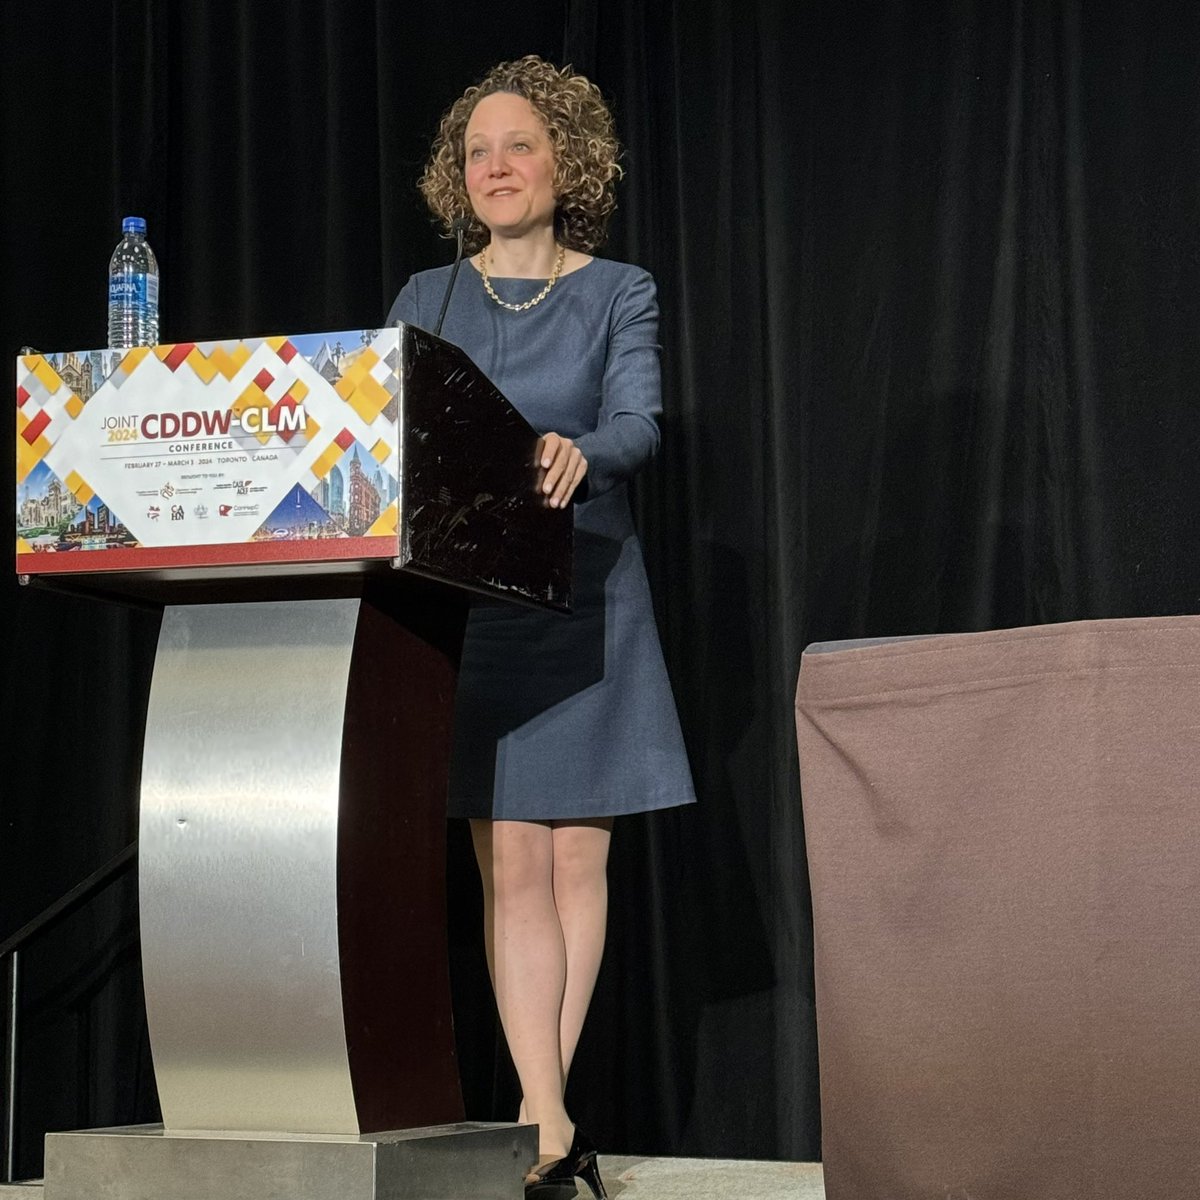 Very nice talk during #cddw2024 by Kara Margolis 'Connections between Disorders of Gut-Brain Interaction and Mood: Clinical Implications and a Novel Intervention Strategy' during the Clinical - Symposium: Hinda Kopelman Memorial Lecture #brain #gut #ibs